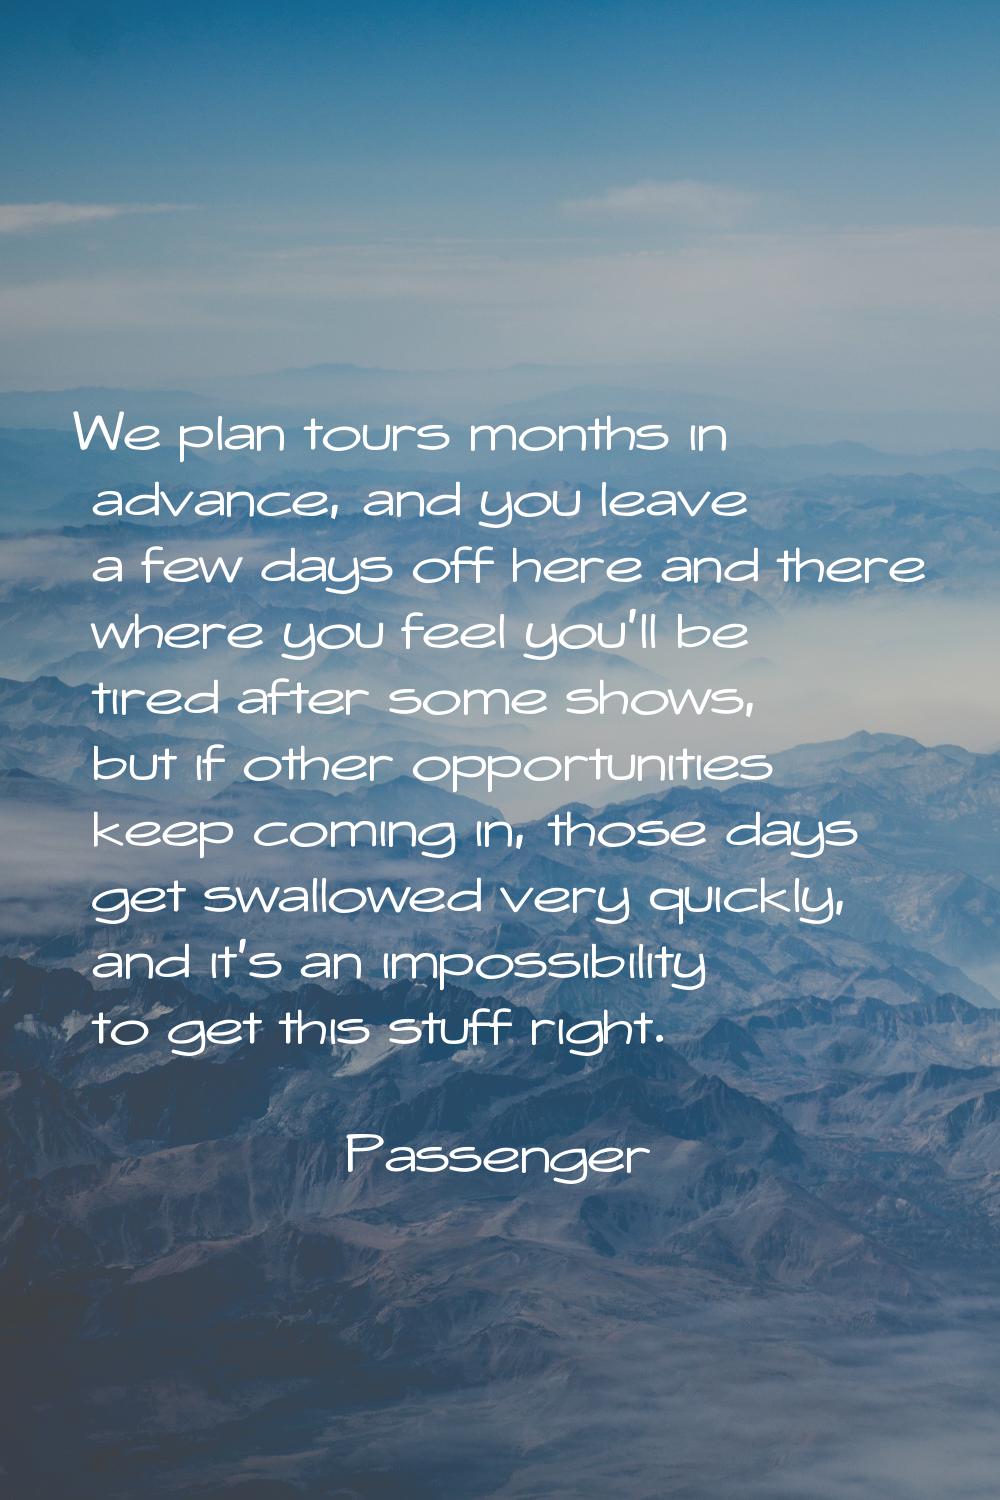 We plan tours months in advance, and you leave a few days off here and there where you feel you'll 